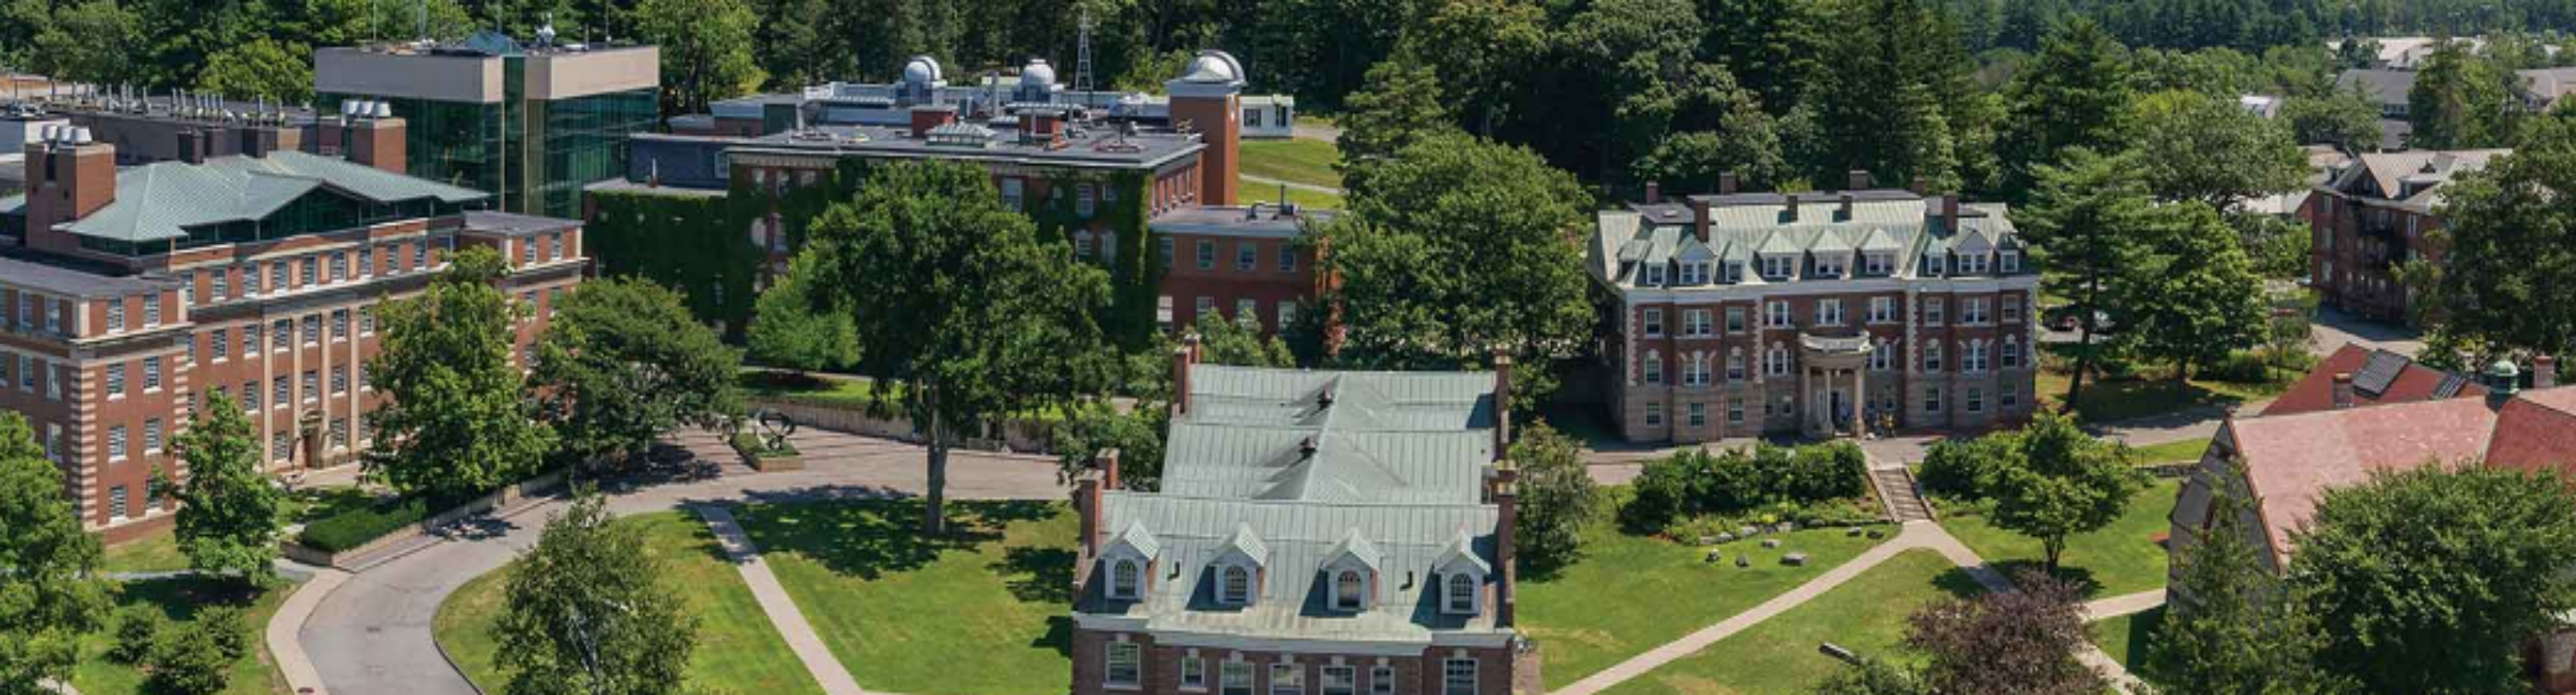 Dartmouth University: Ranking, Acceptance Rate, Notable Alumni, Fees, Majors and everything